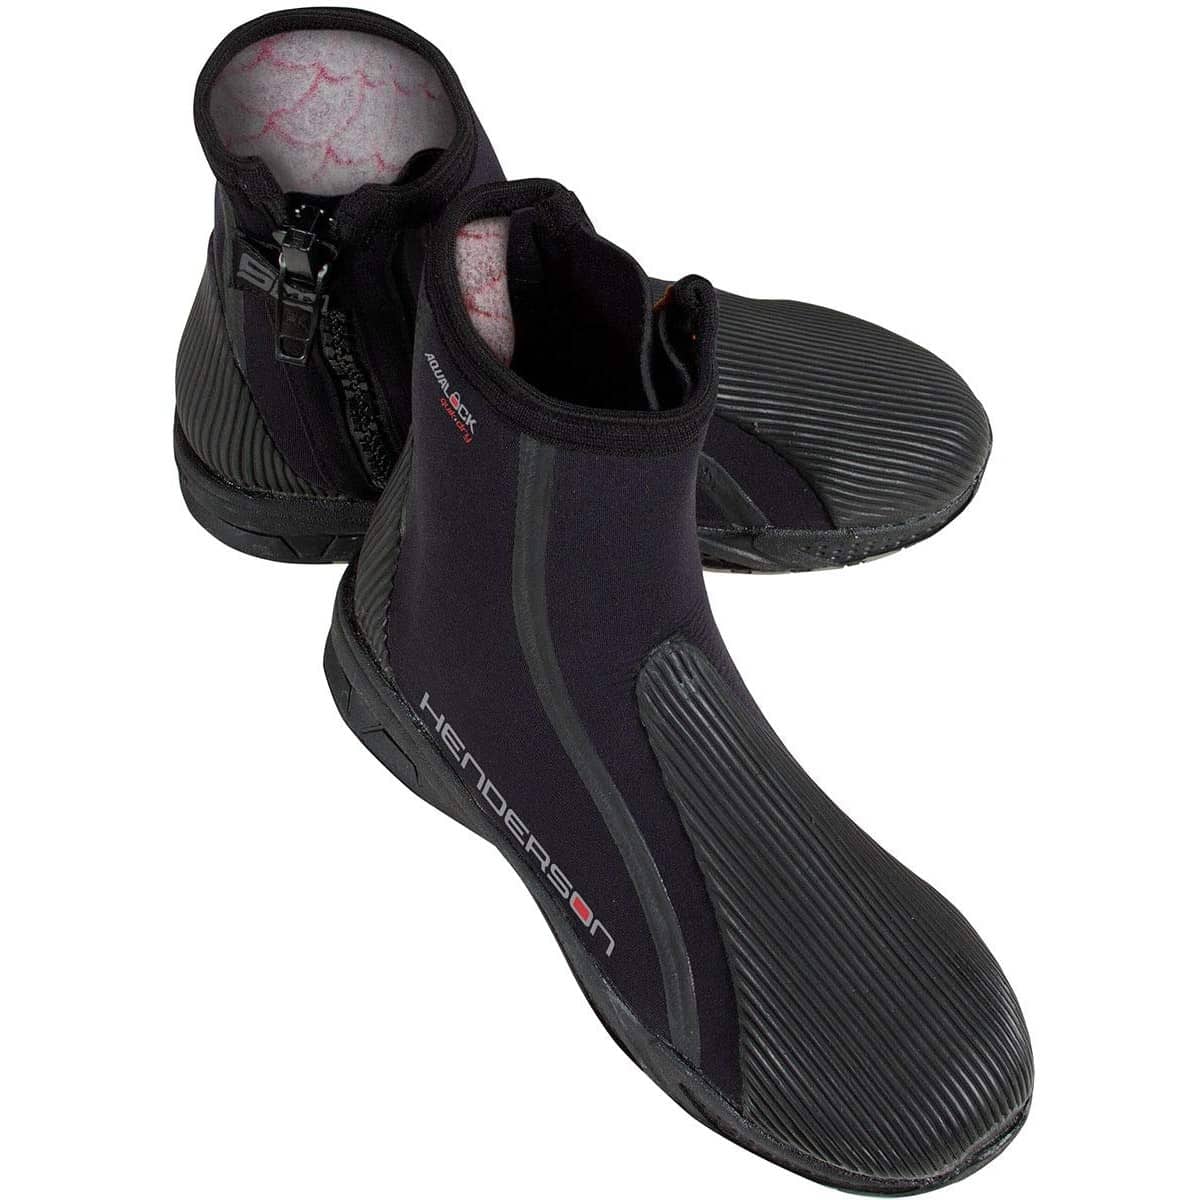 Top 10 Best Dive Boots in 2023 Reviews | Buying Guide